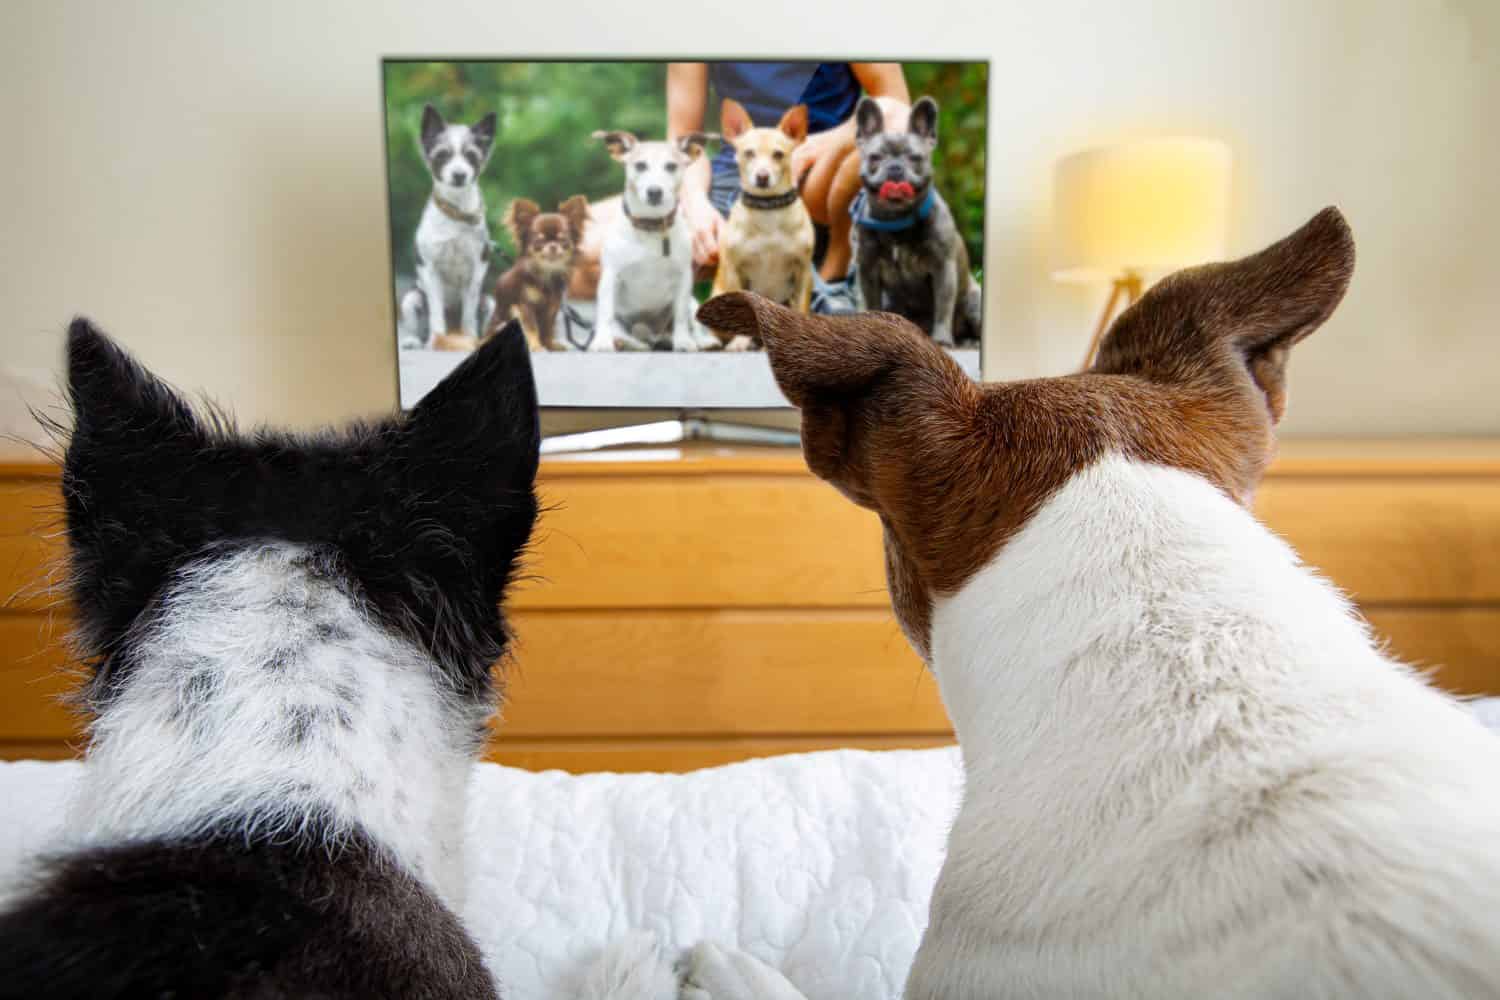 couple of dogs wacthing streaming  tv program , movie or series in bed cozy together